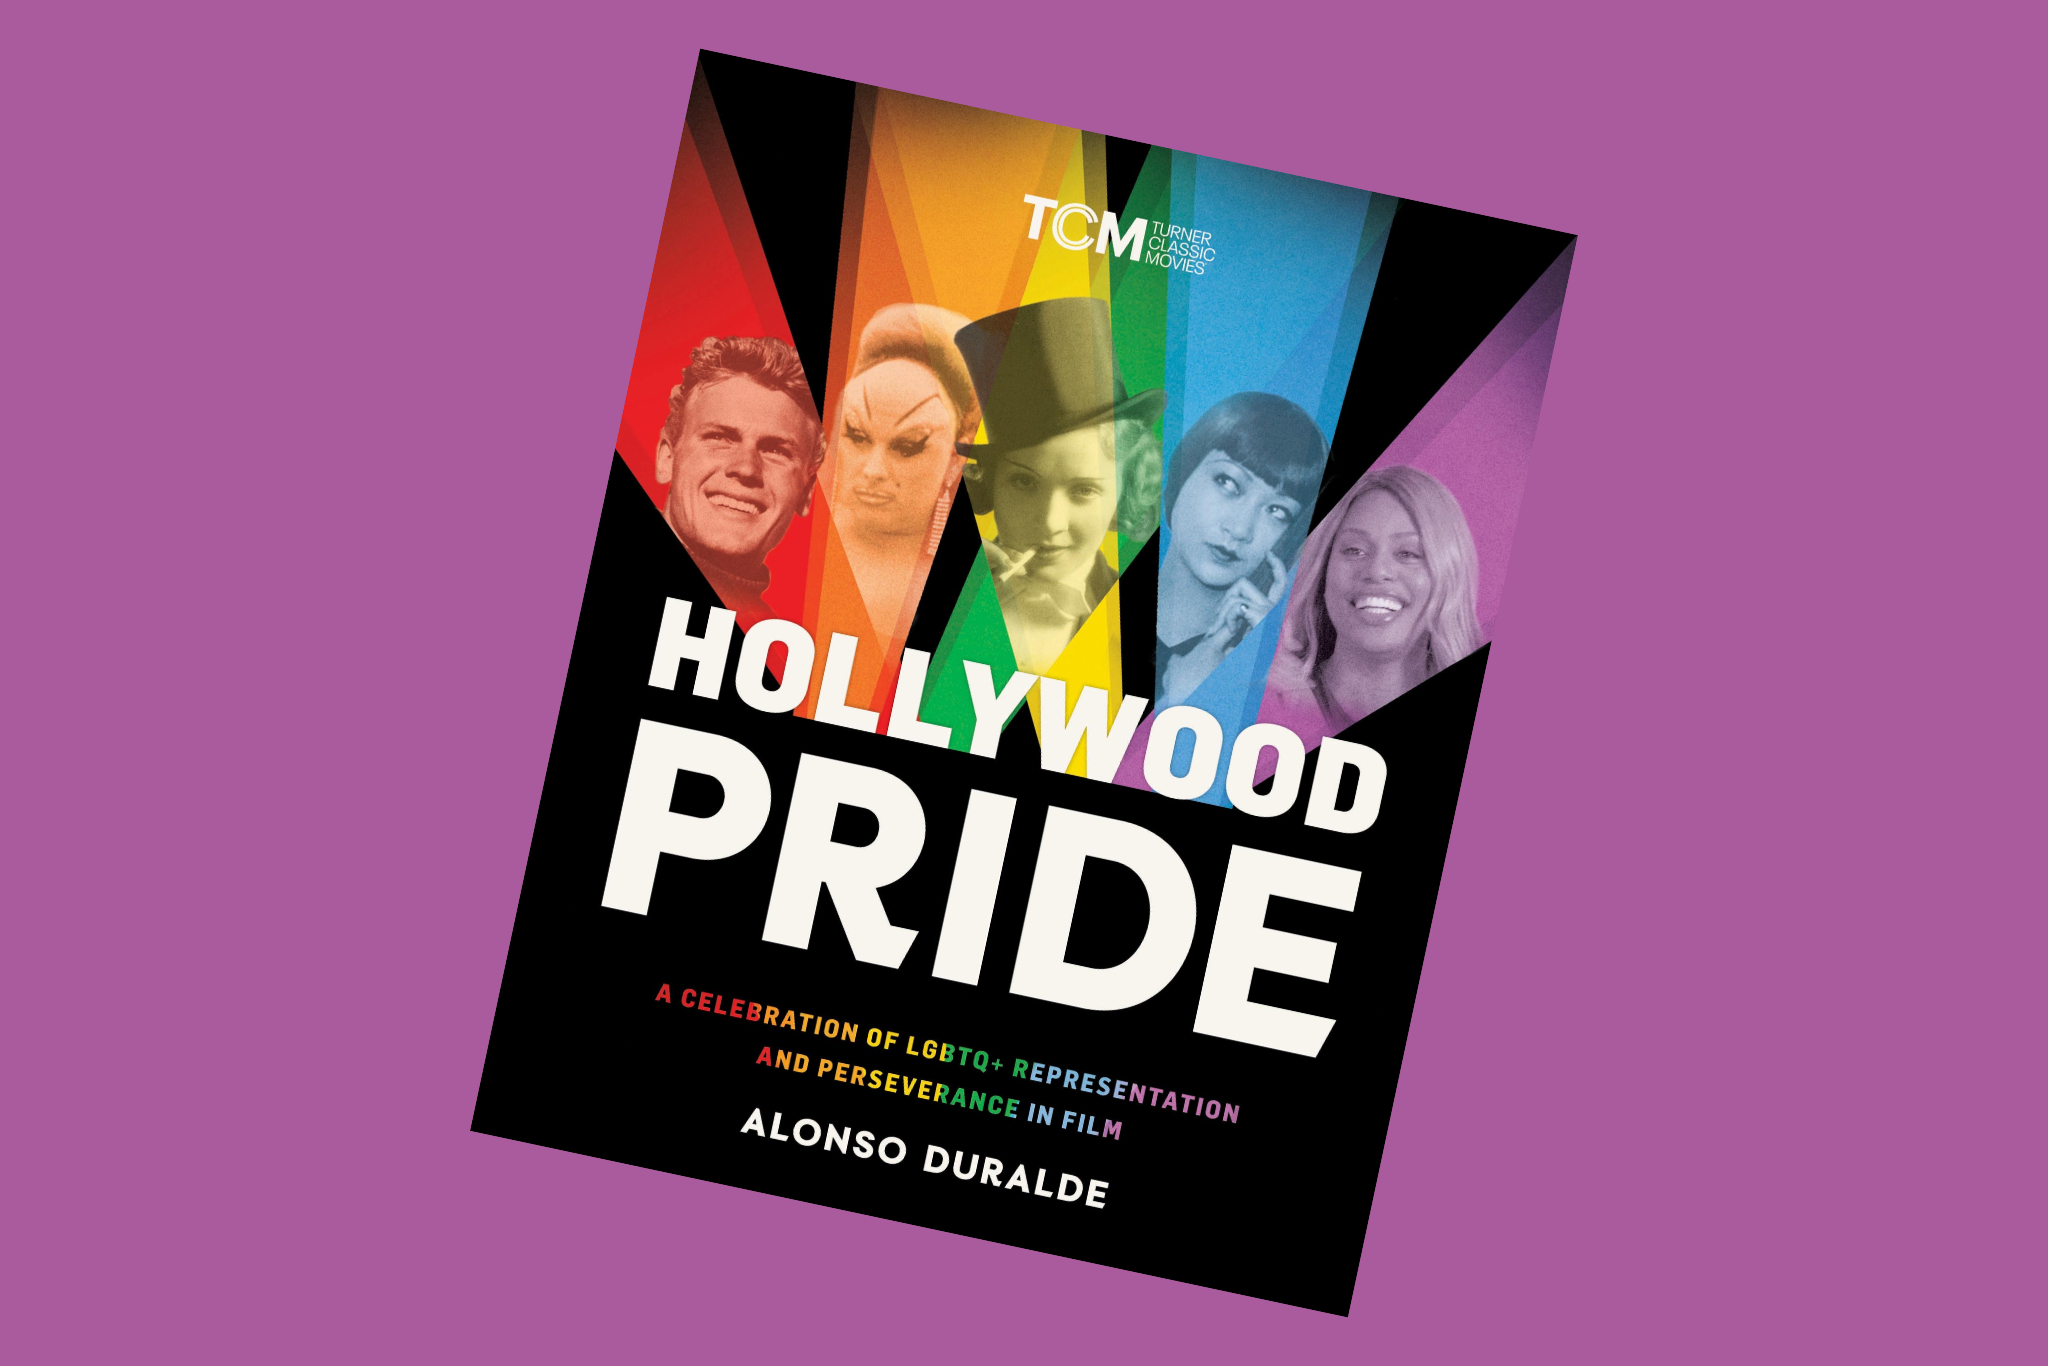 Queer Reads: TCM goes gay with “Hollywood Pride” by Alonso Duralde